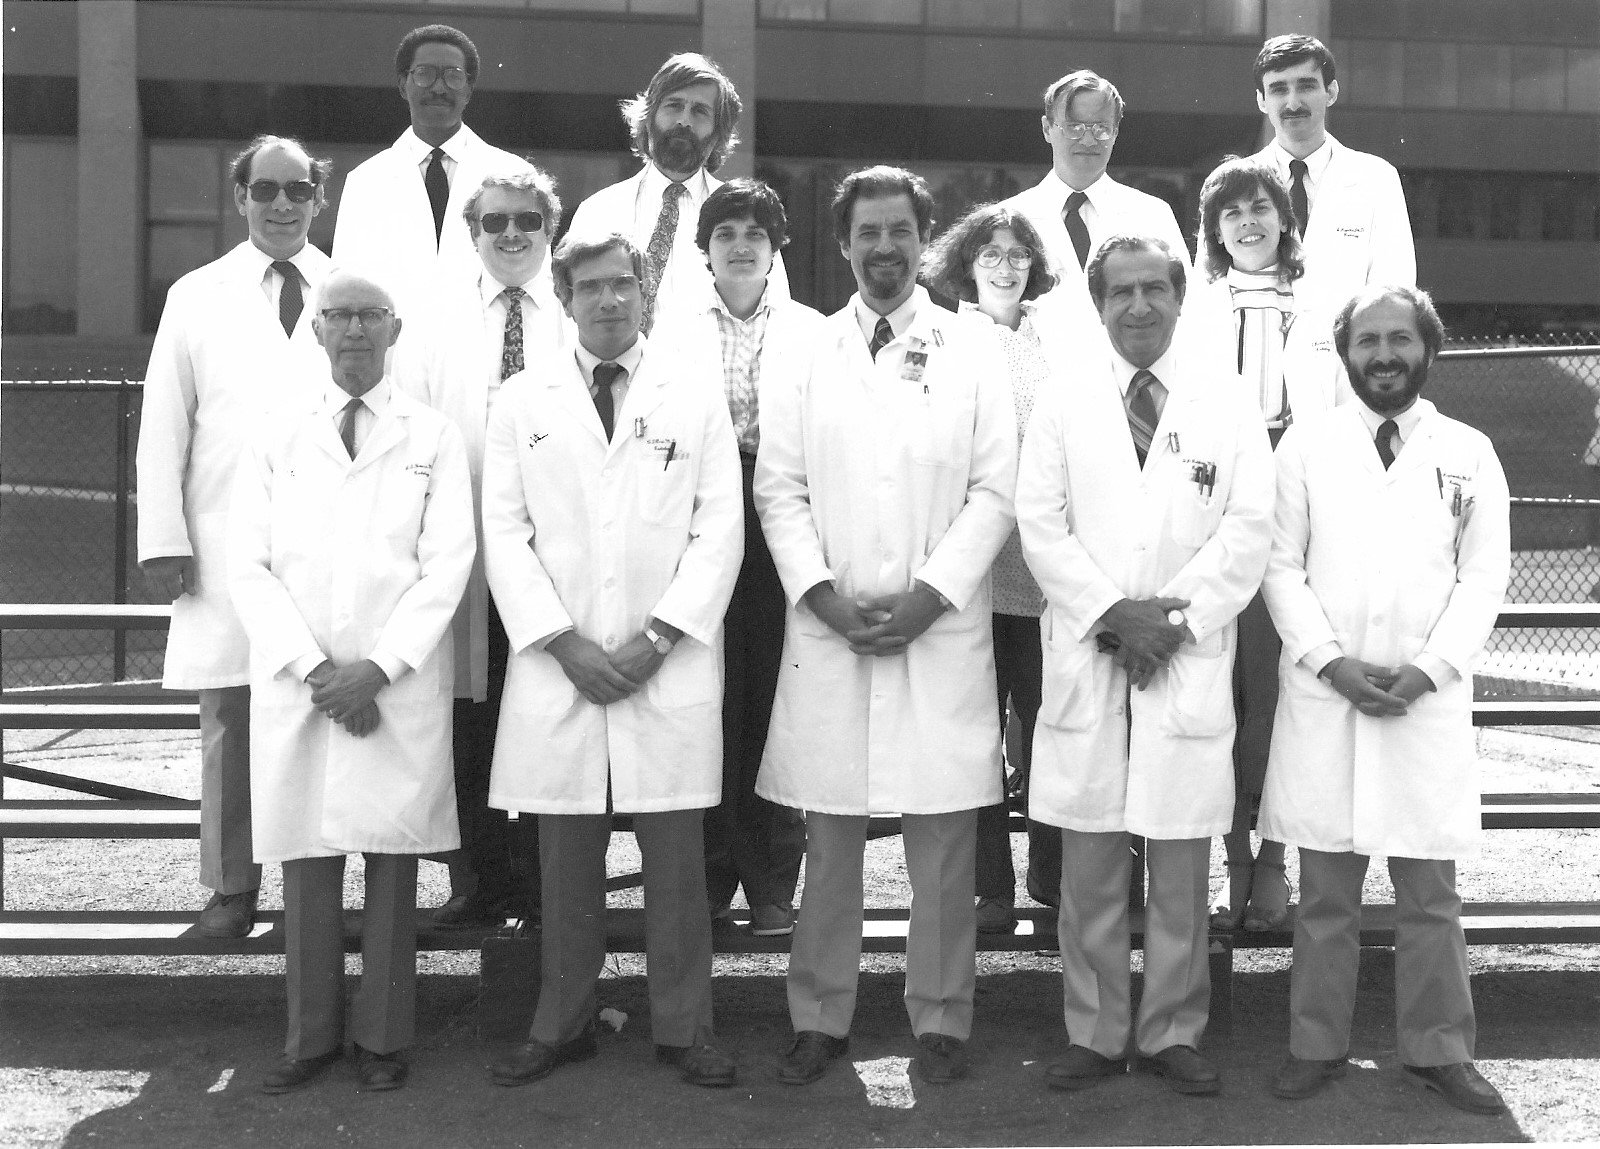 UMass Radiology Faculty and Staff 1983-1984